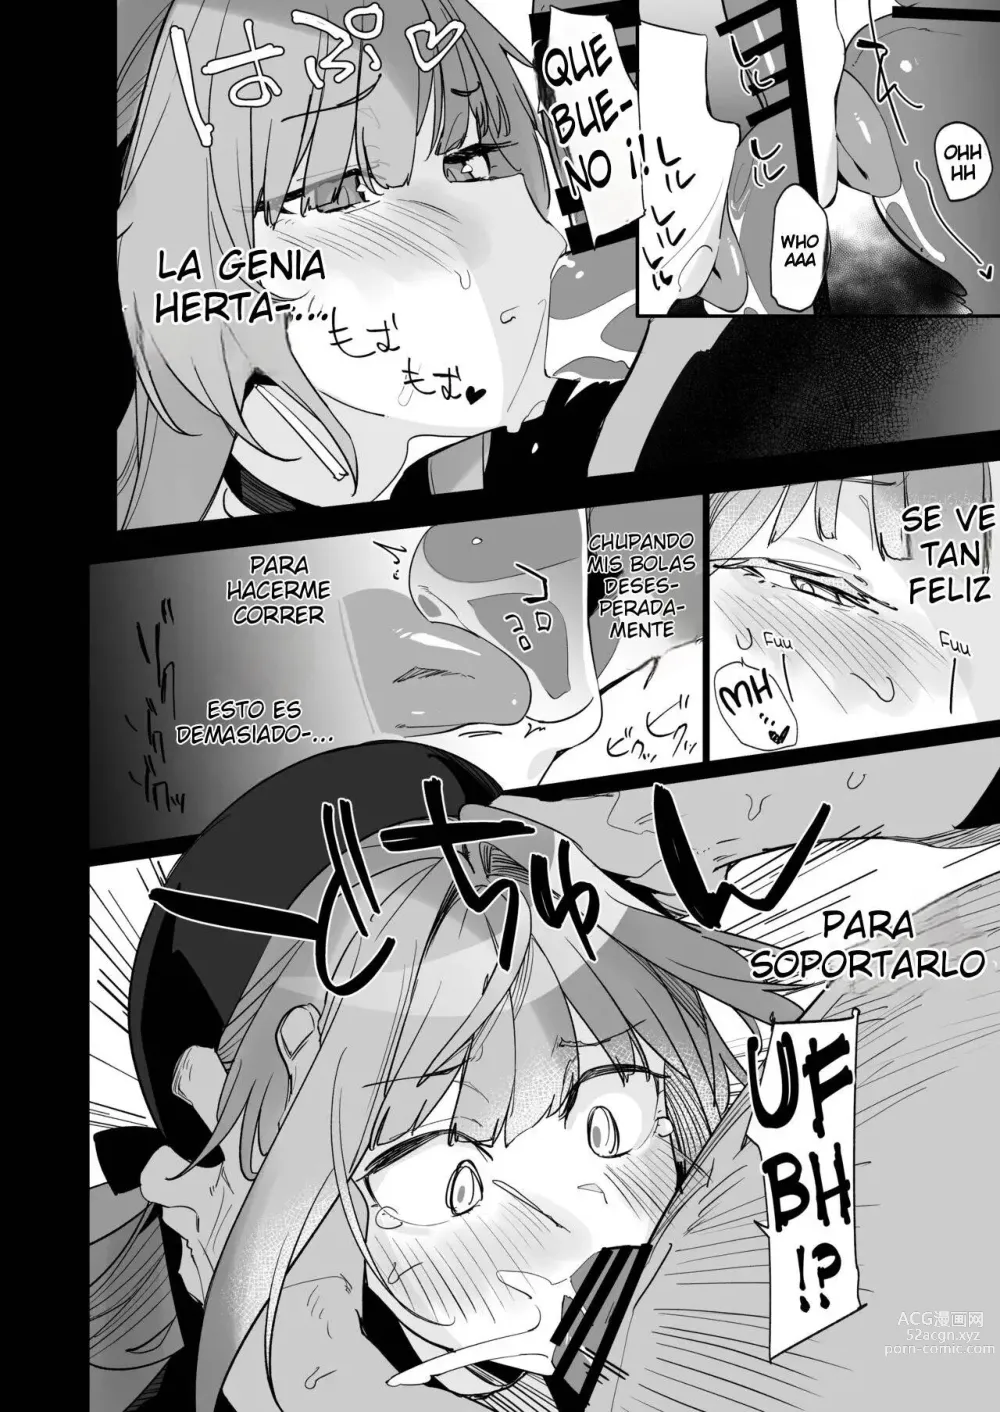 Page 5 of doujinshi The Story Where Madame Herta’s Perfection Goes POOF!